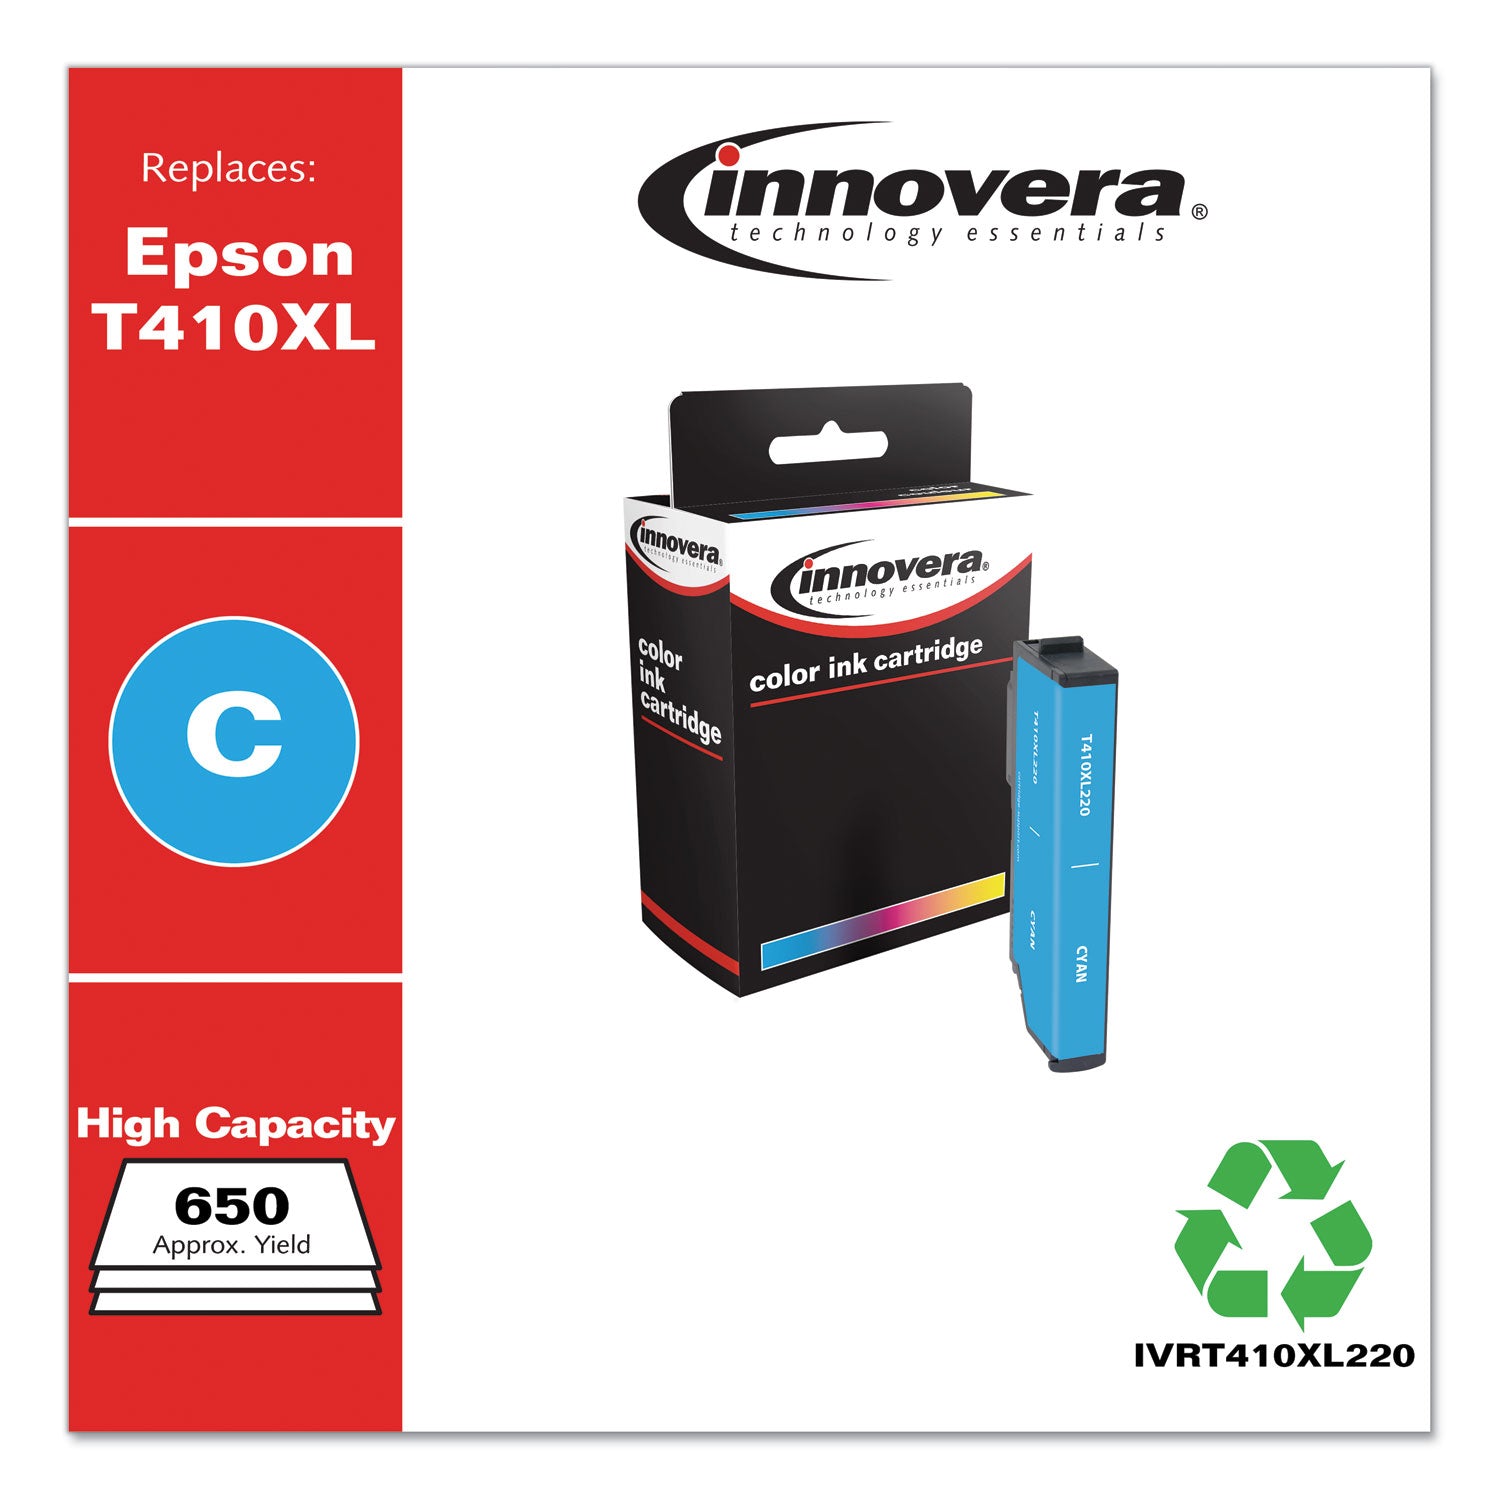 remanufactured-cyan-high-yield-ink-replacement-for-t410xl-t410xl220-650-page-yield_ivrt410xl220 - 2